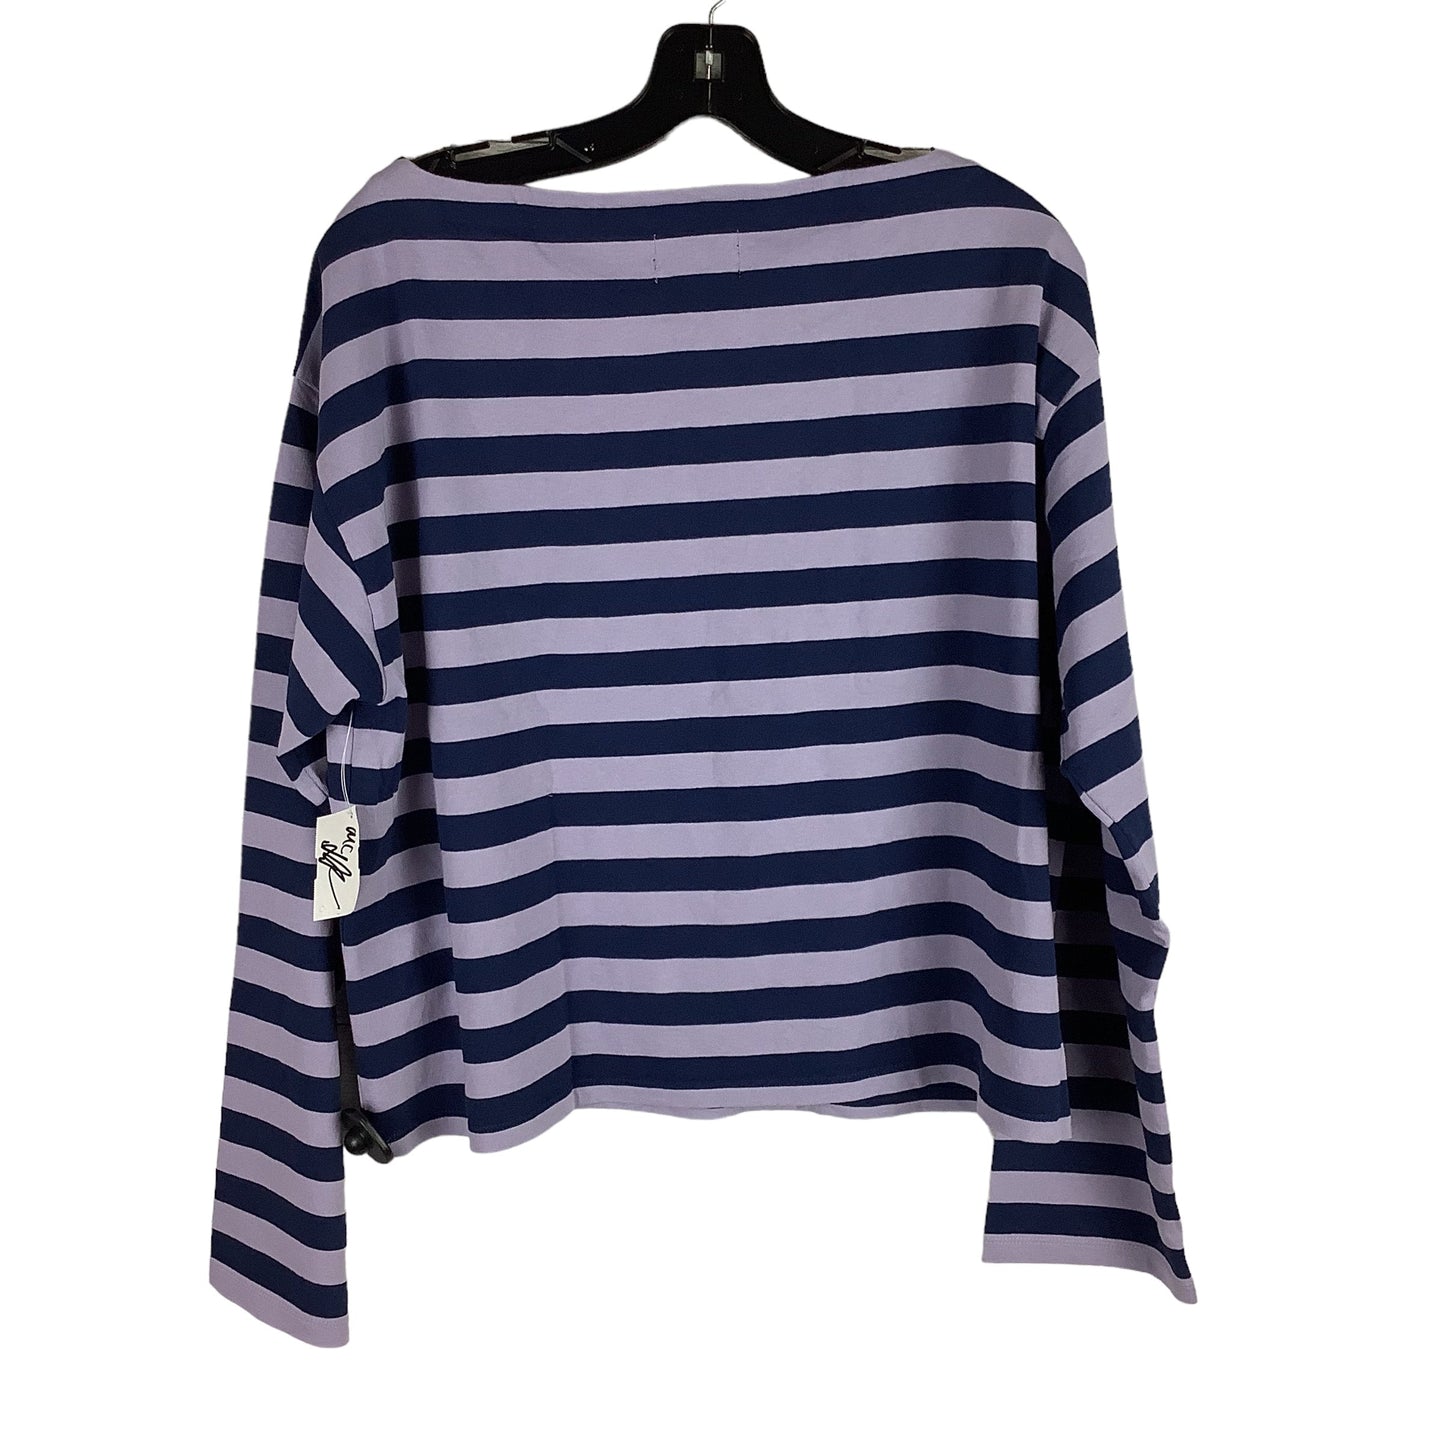 Top Long Sleeve By J. Crew  Size: L